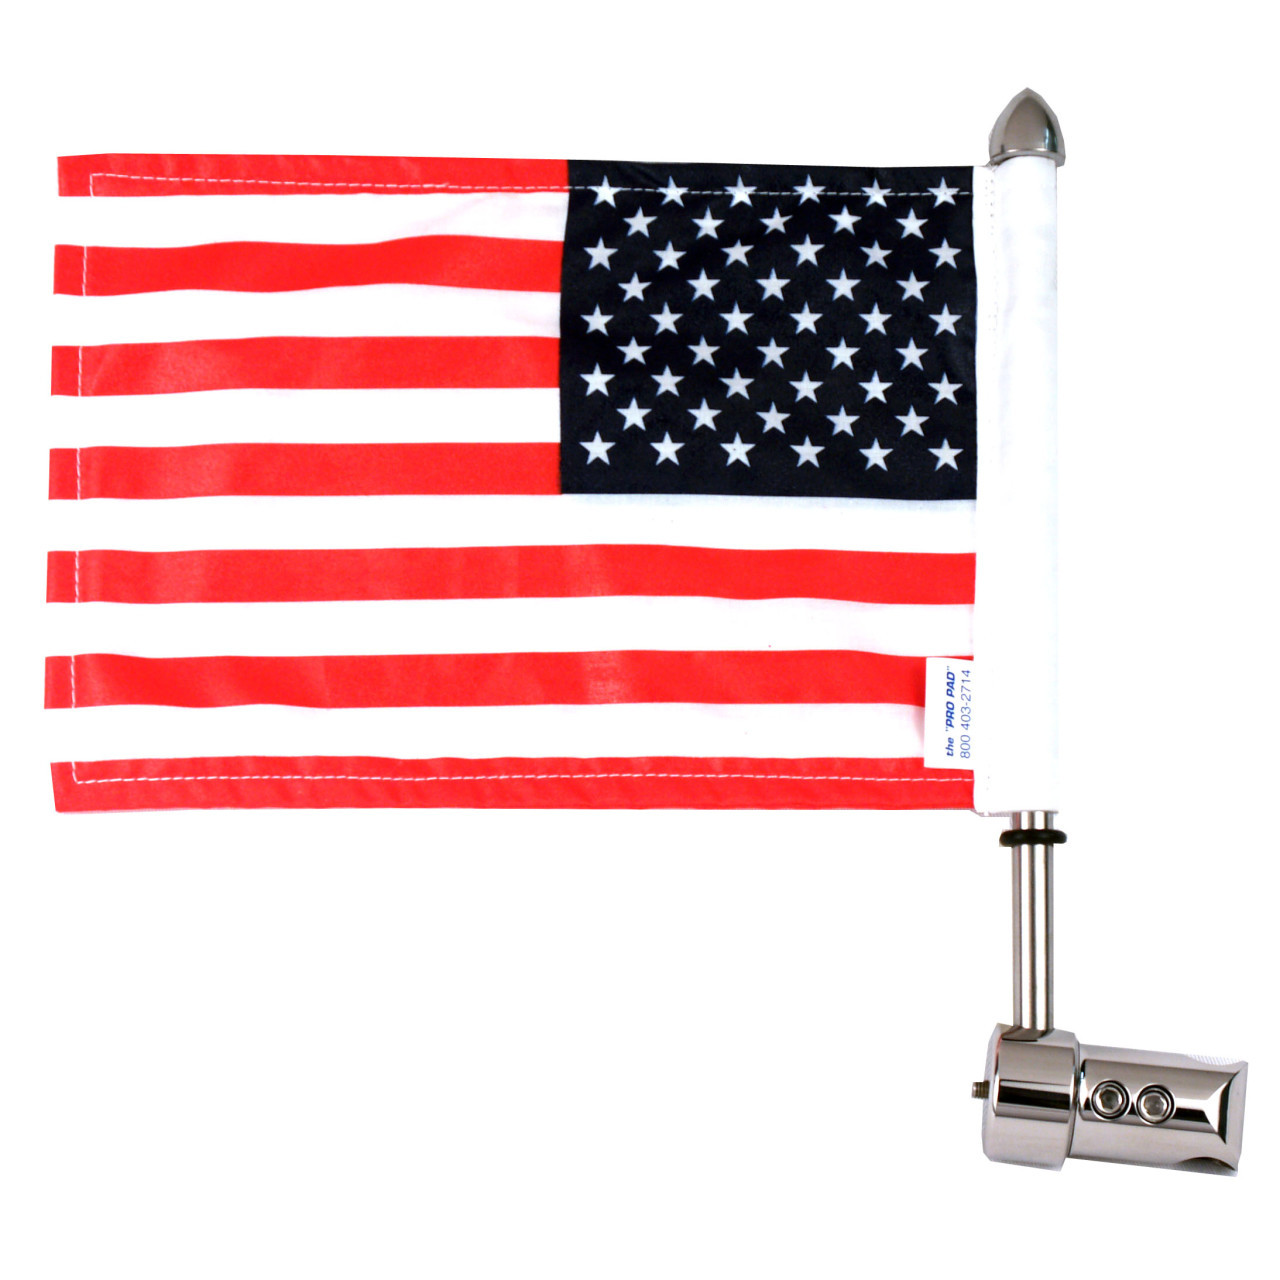 Pro Pad RFM-RDSB5 5/8 Mount with 6 x 9 Highway Flag